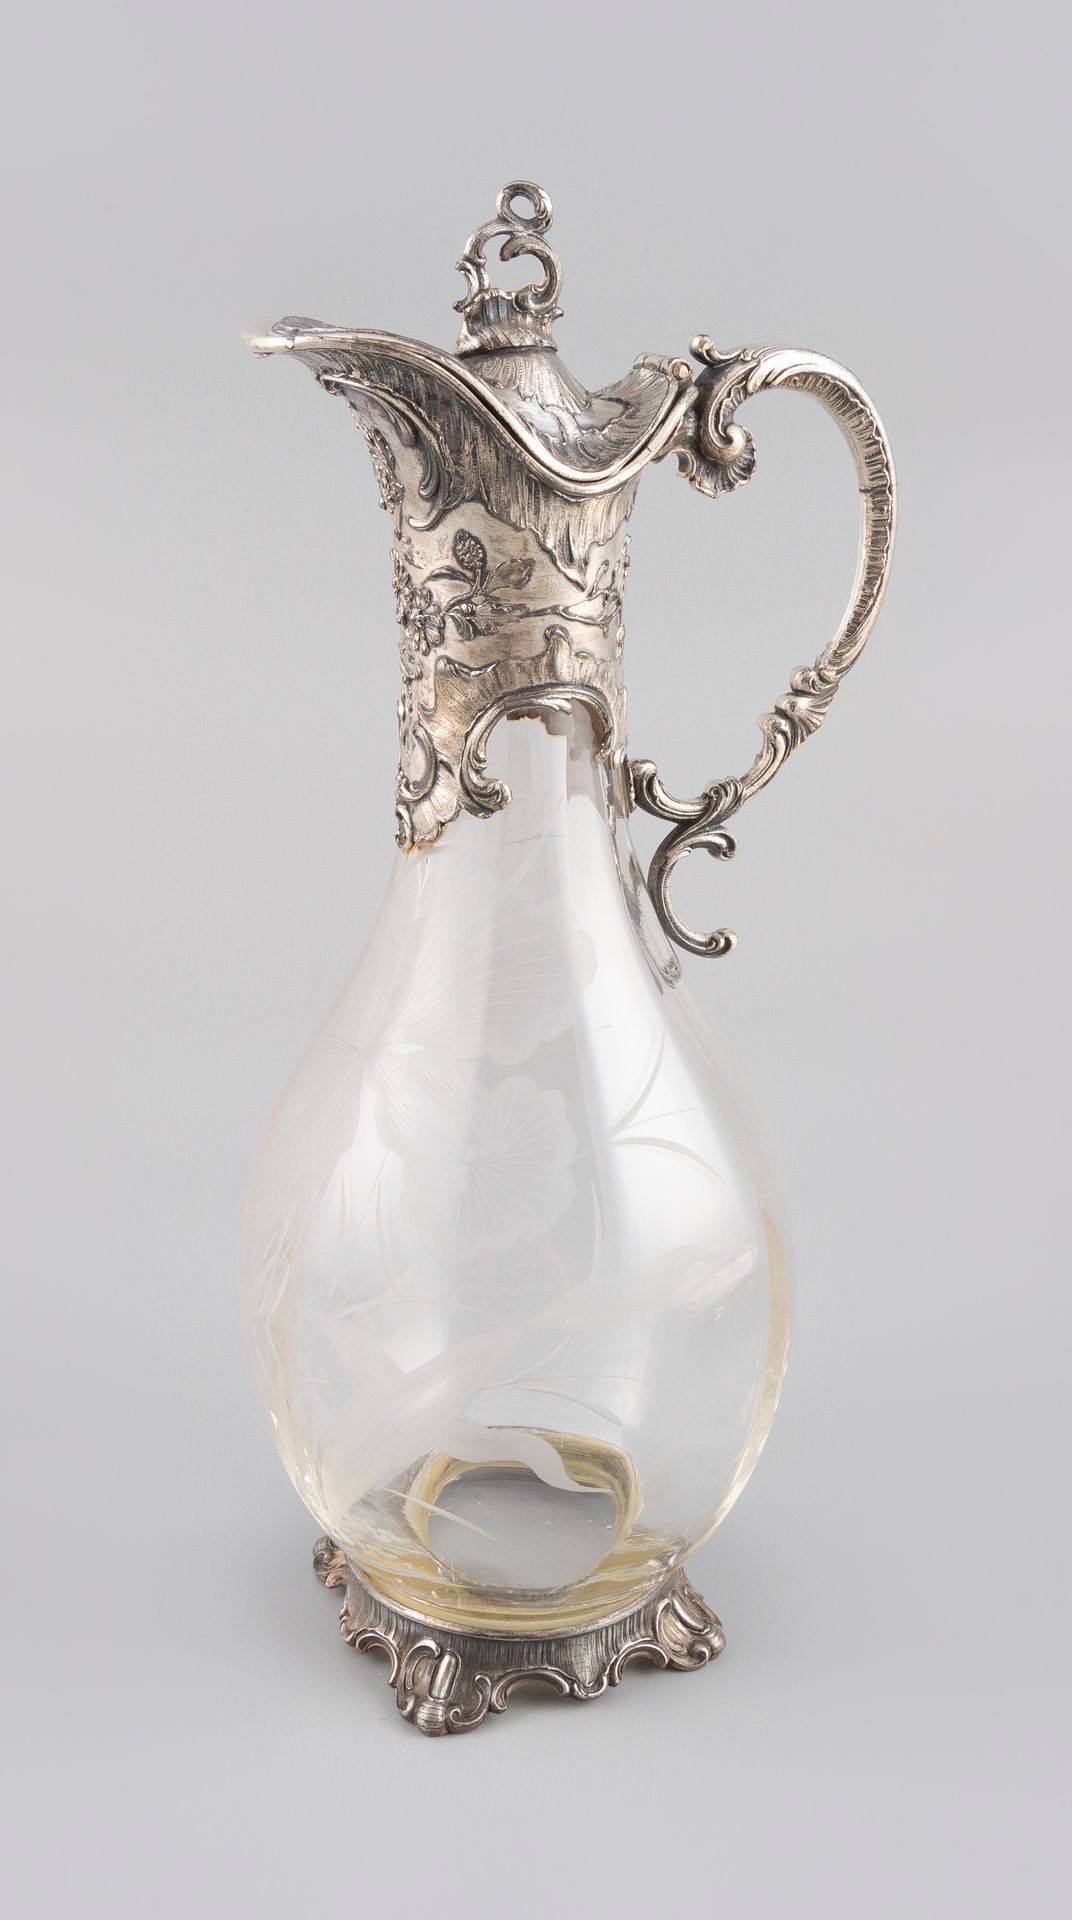 Null Glass ewer engraved with floral motifs, the metal frame.